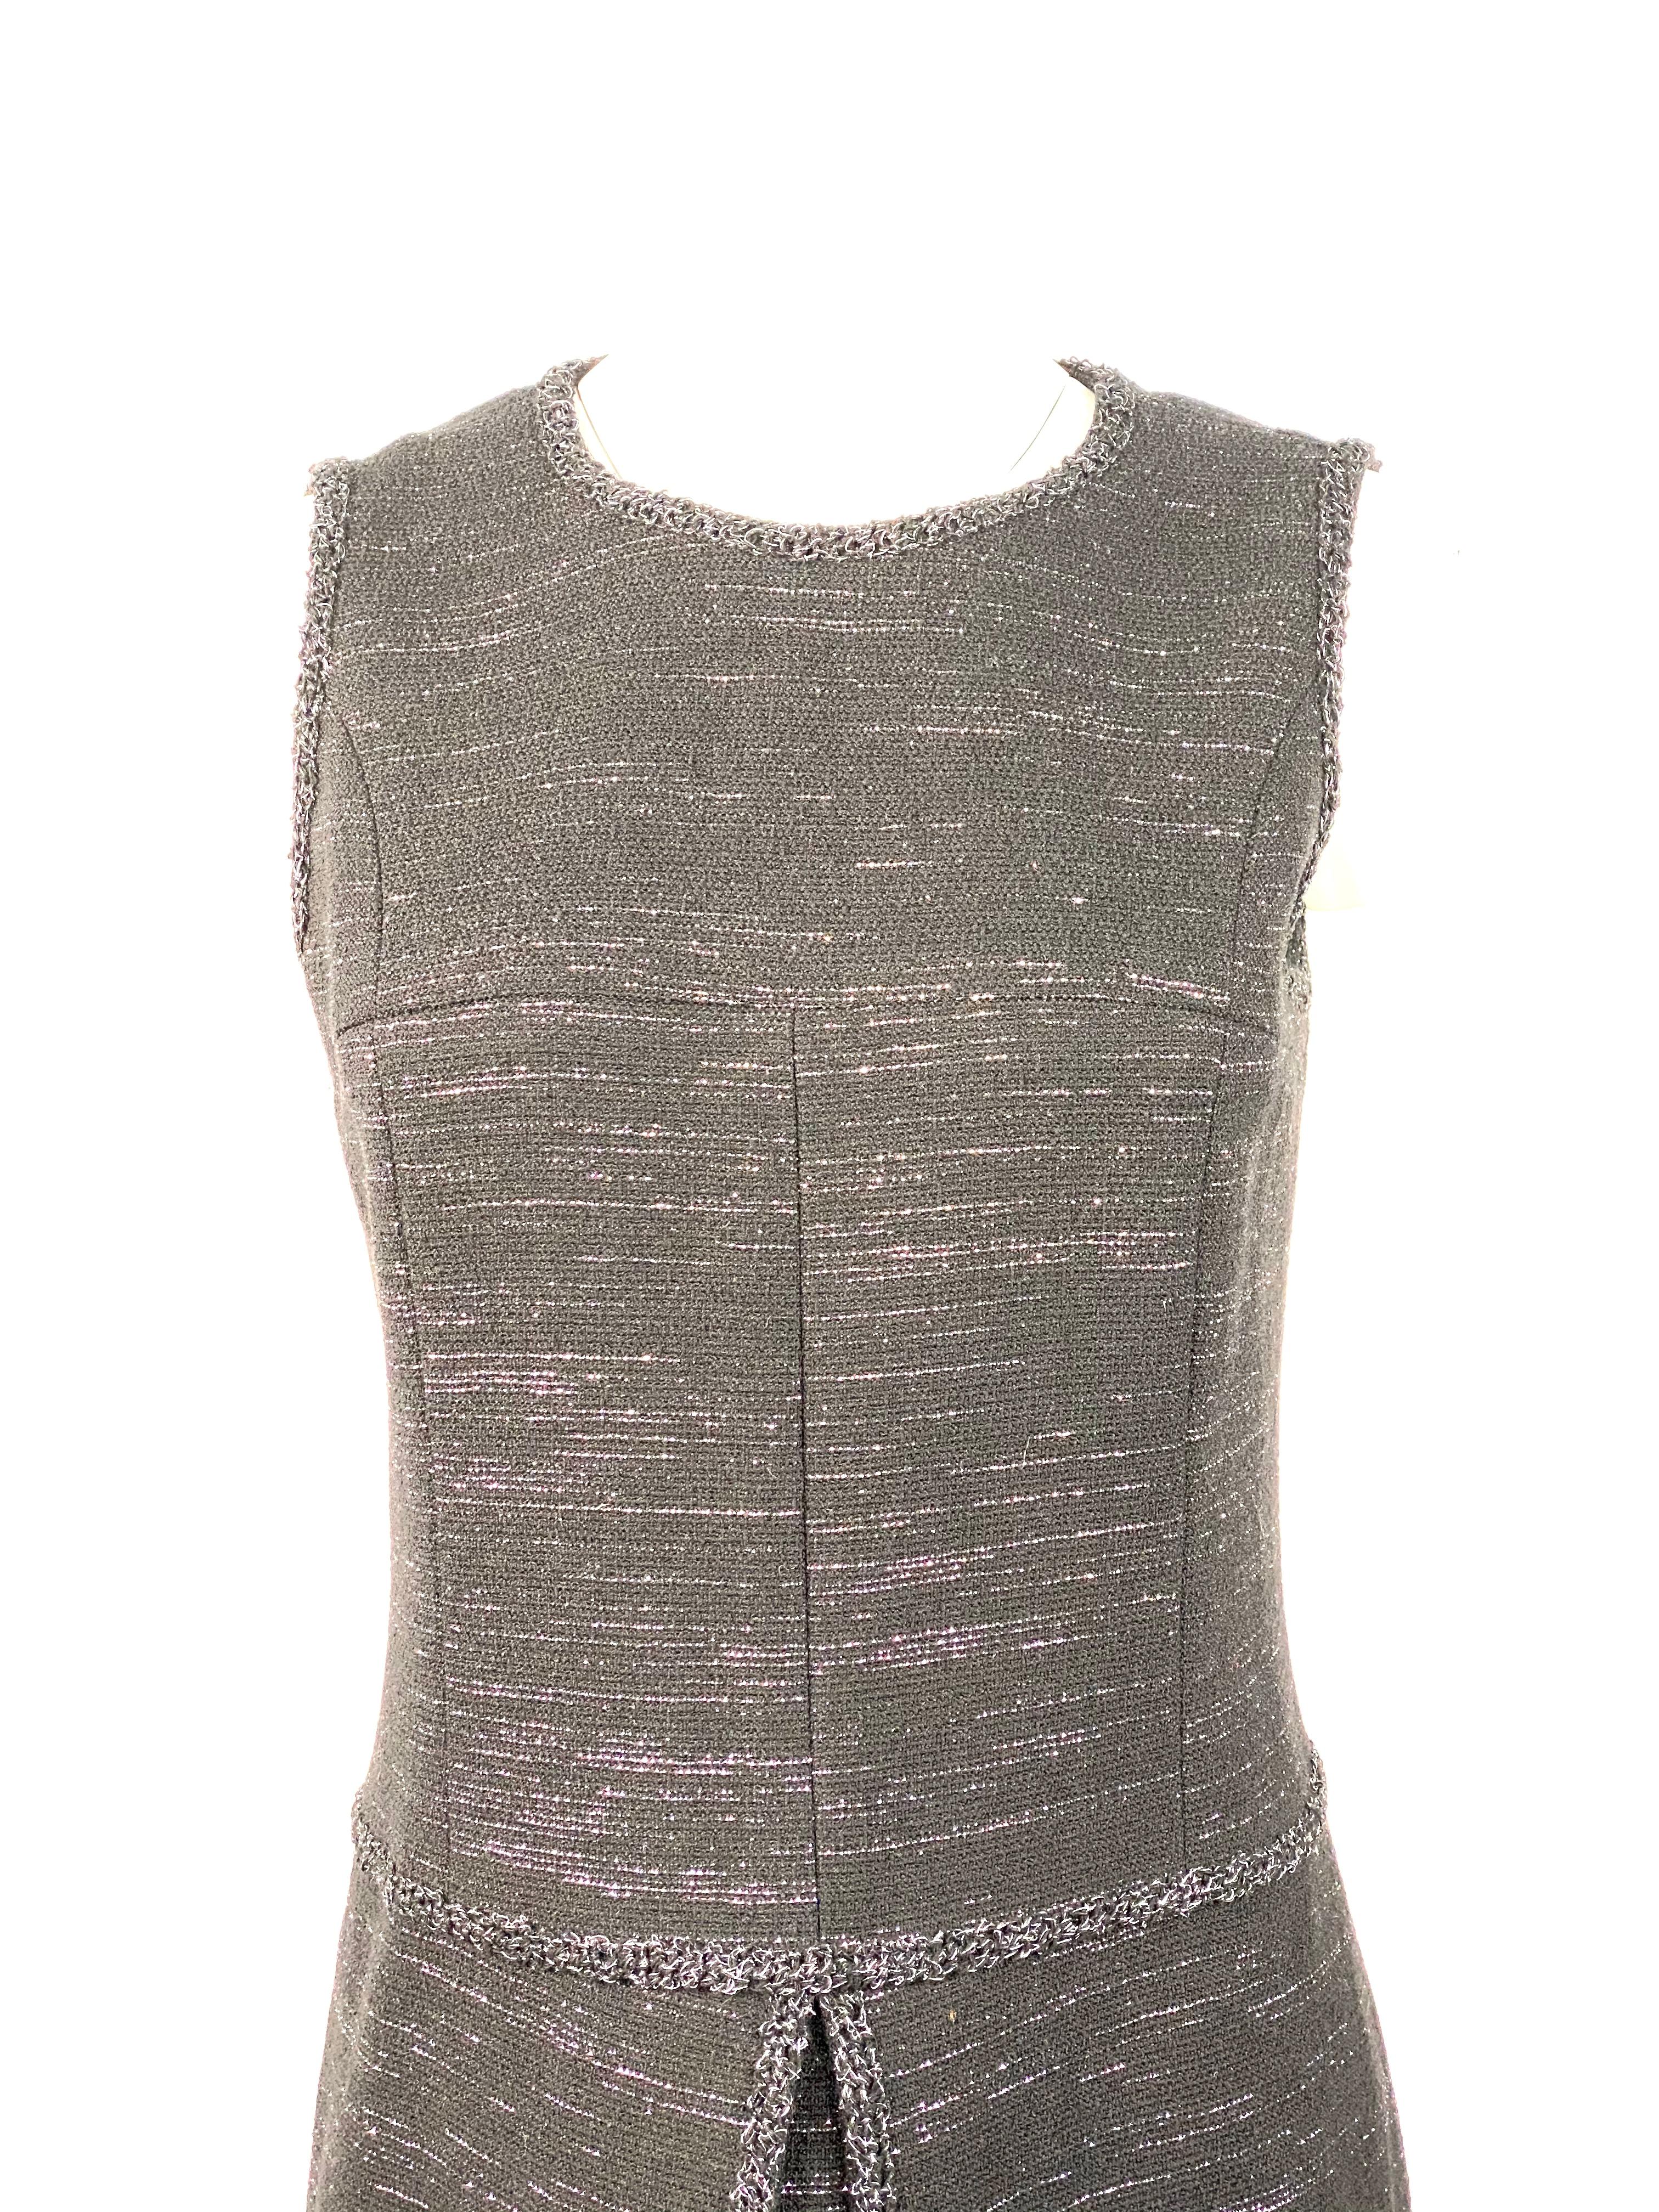 Chanel Black Tweed and Metallic Sleeveless Midi Dress Size 40

Product details:
Size 40
Black tweed with metallic detail
92% Wool
Featuring front slit design detail
Rear zip and hook closure 
Double silk lining with Chanel logo pattern
Made in